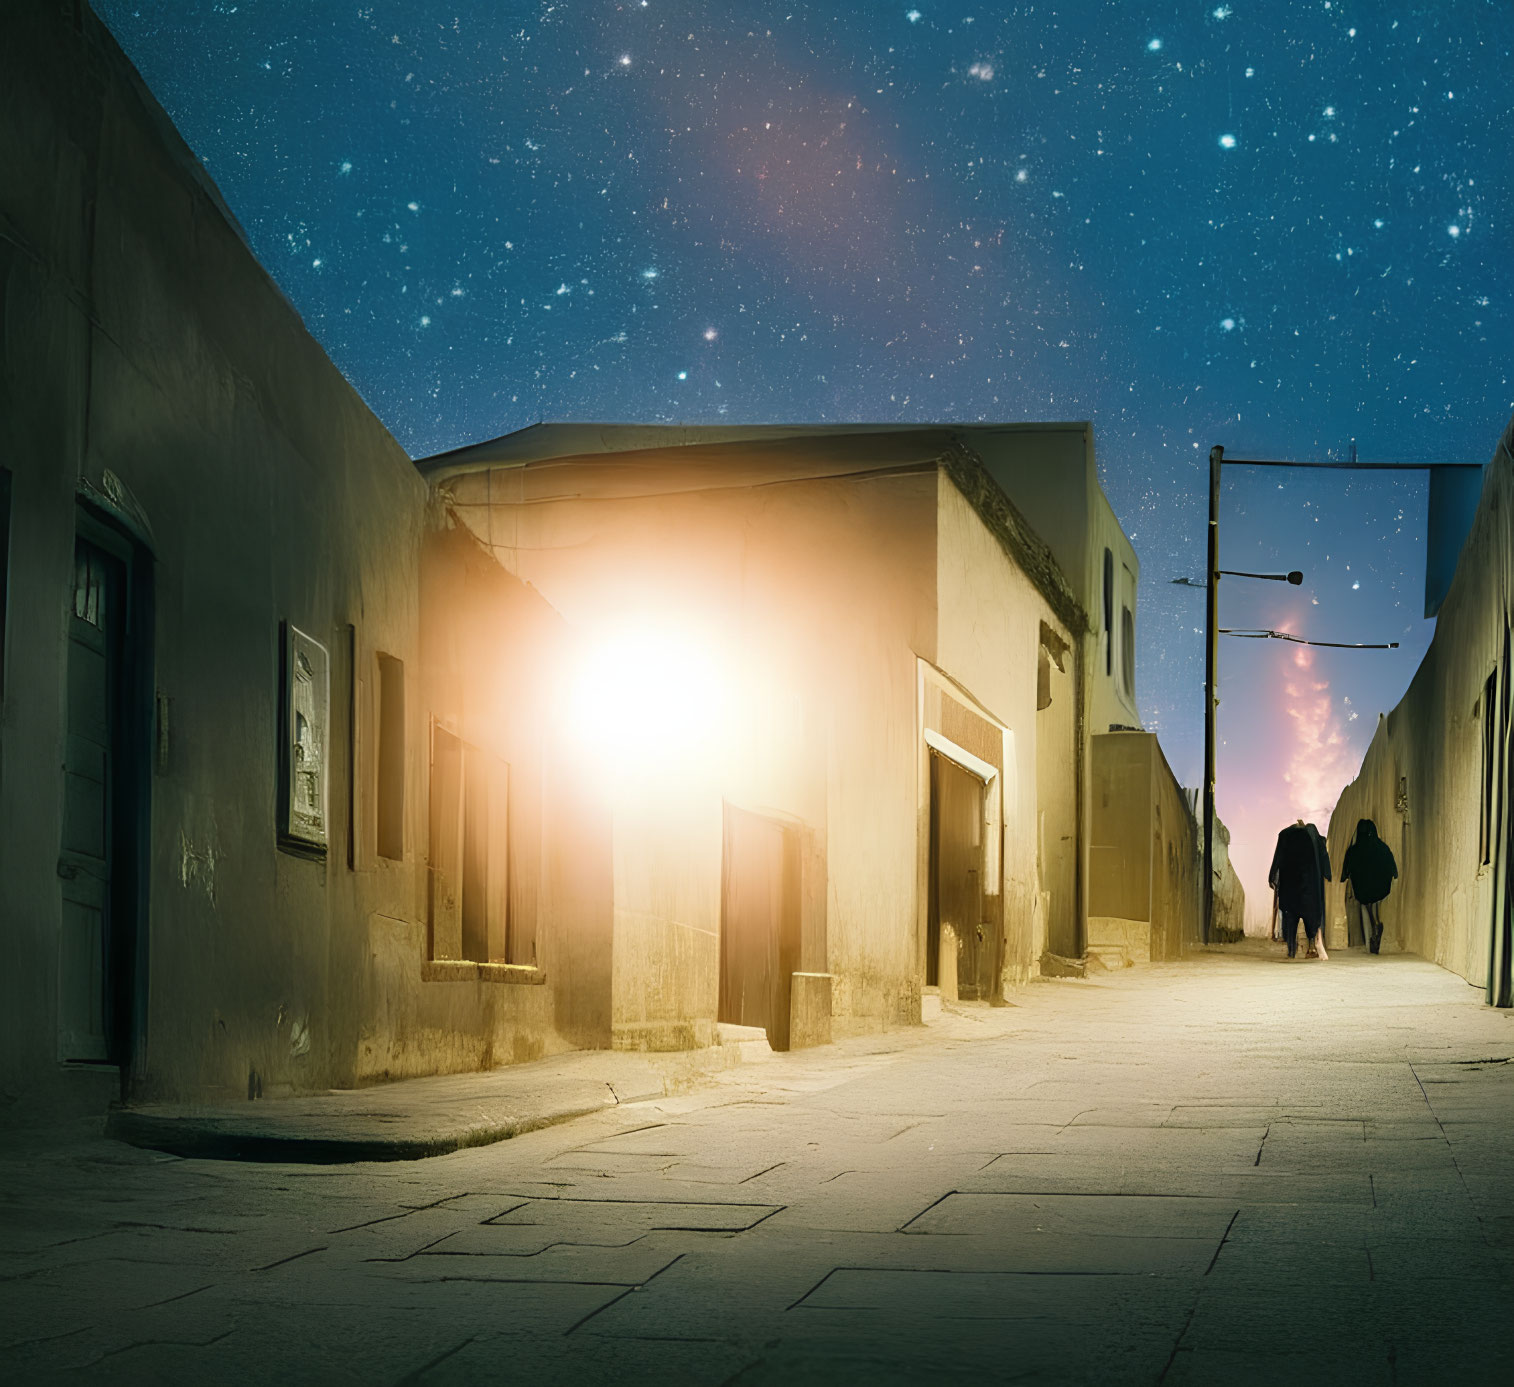 Narrow street at dusk with long shadows and two people walking under starry sky